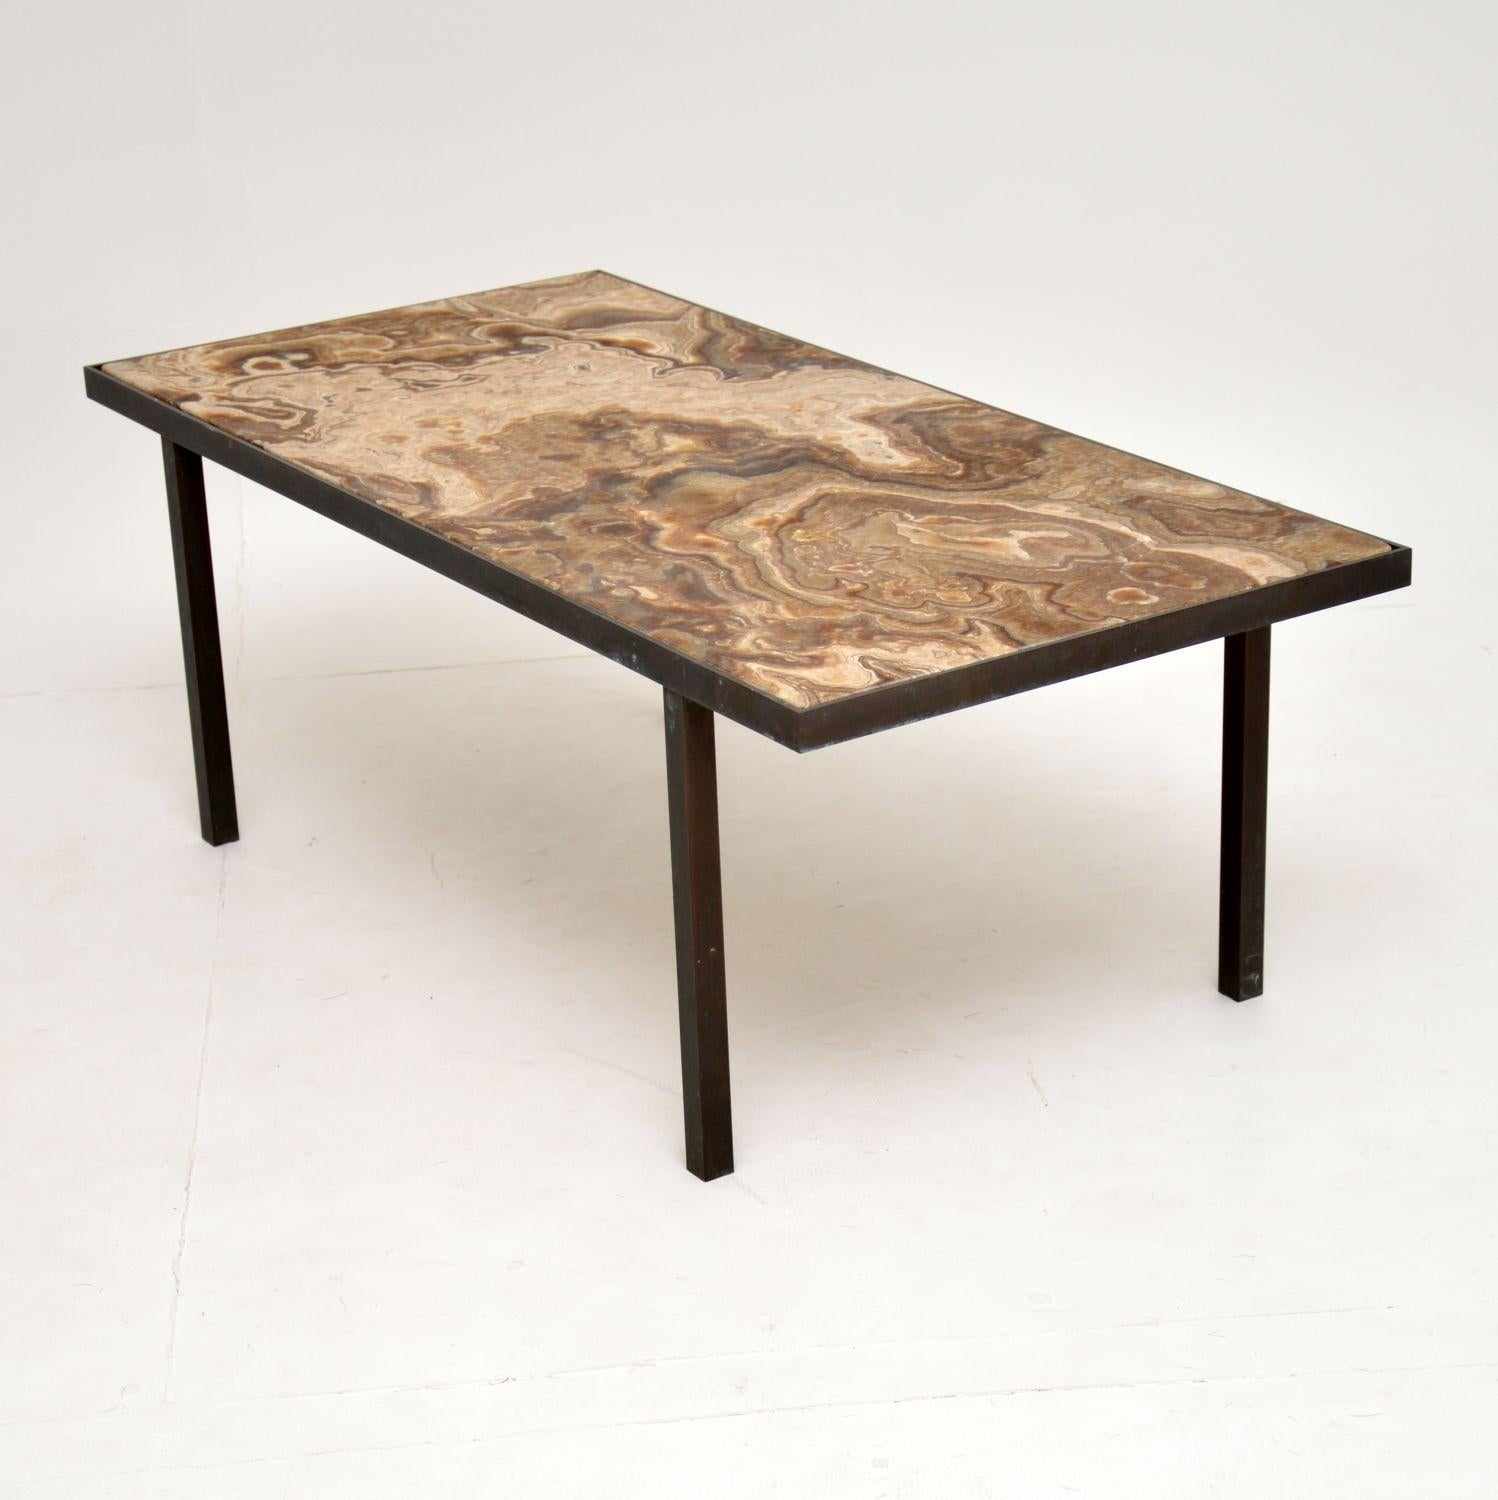 British 1950s Vintage Marble and Brass Coffee Table